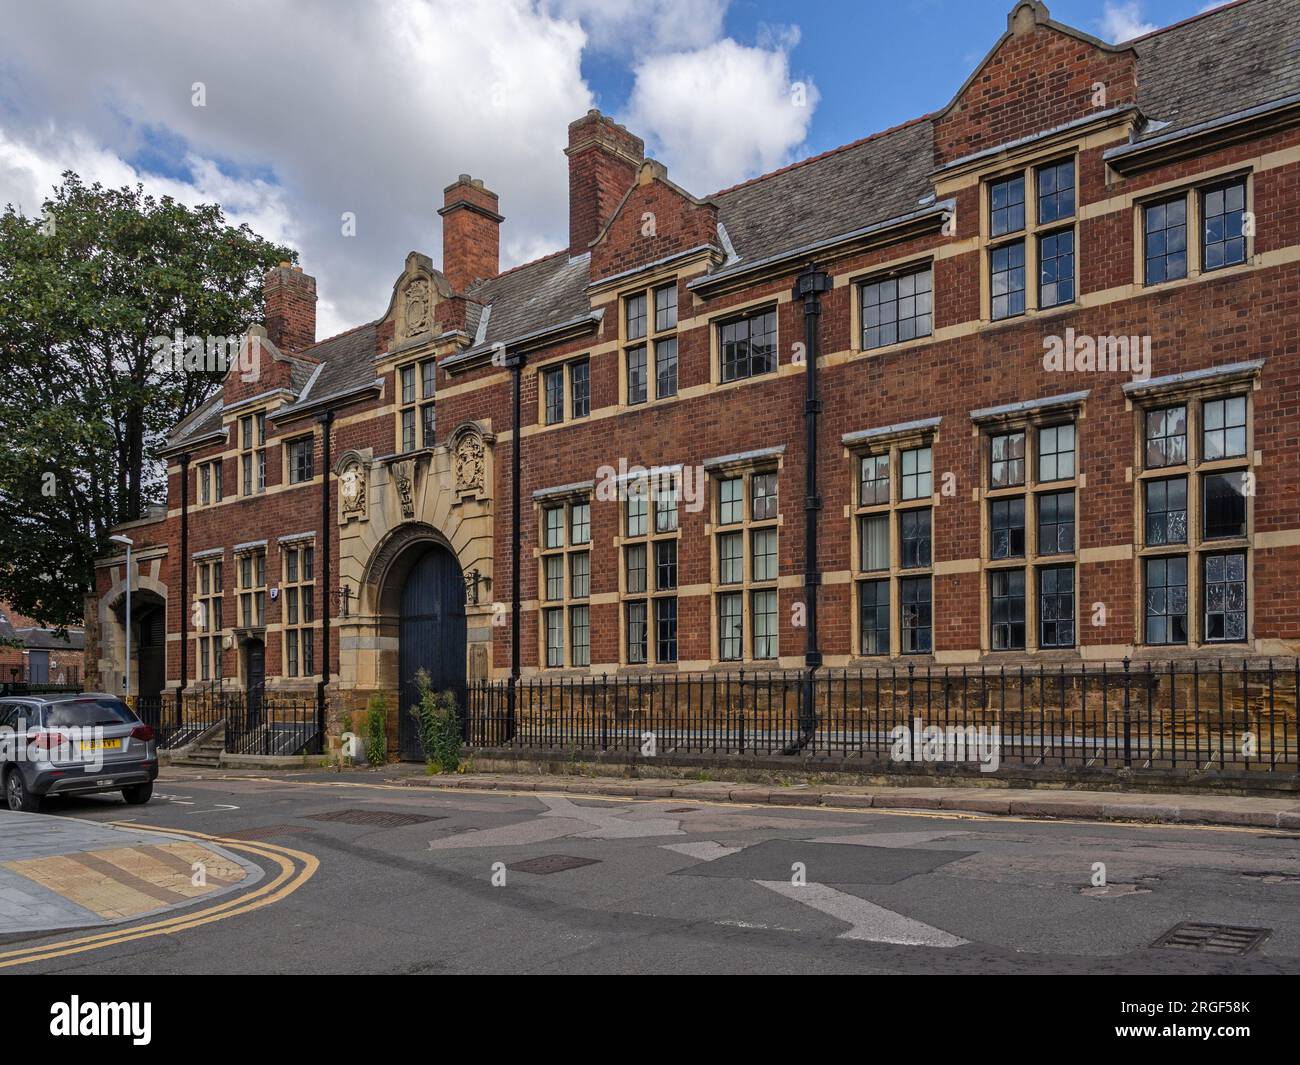 A former gaol building dating from 1791, Northampton, UK Stock Photo